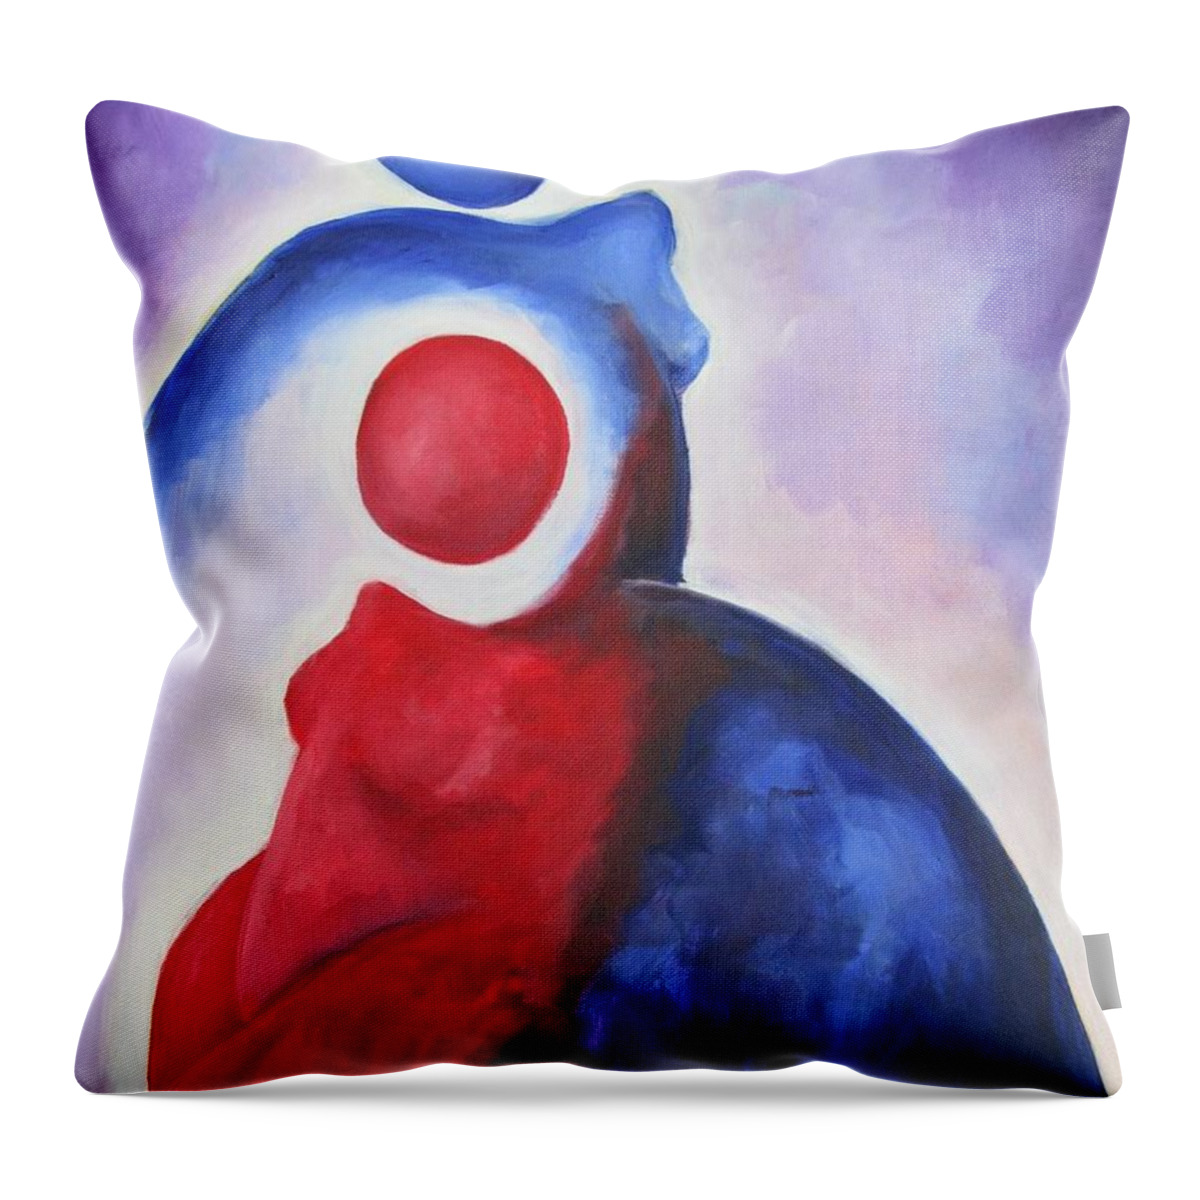 Red Throw Pillow featuring the painting Love is my Strength by Jennifer Hannigan-Green